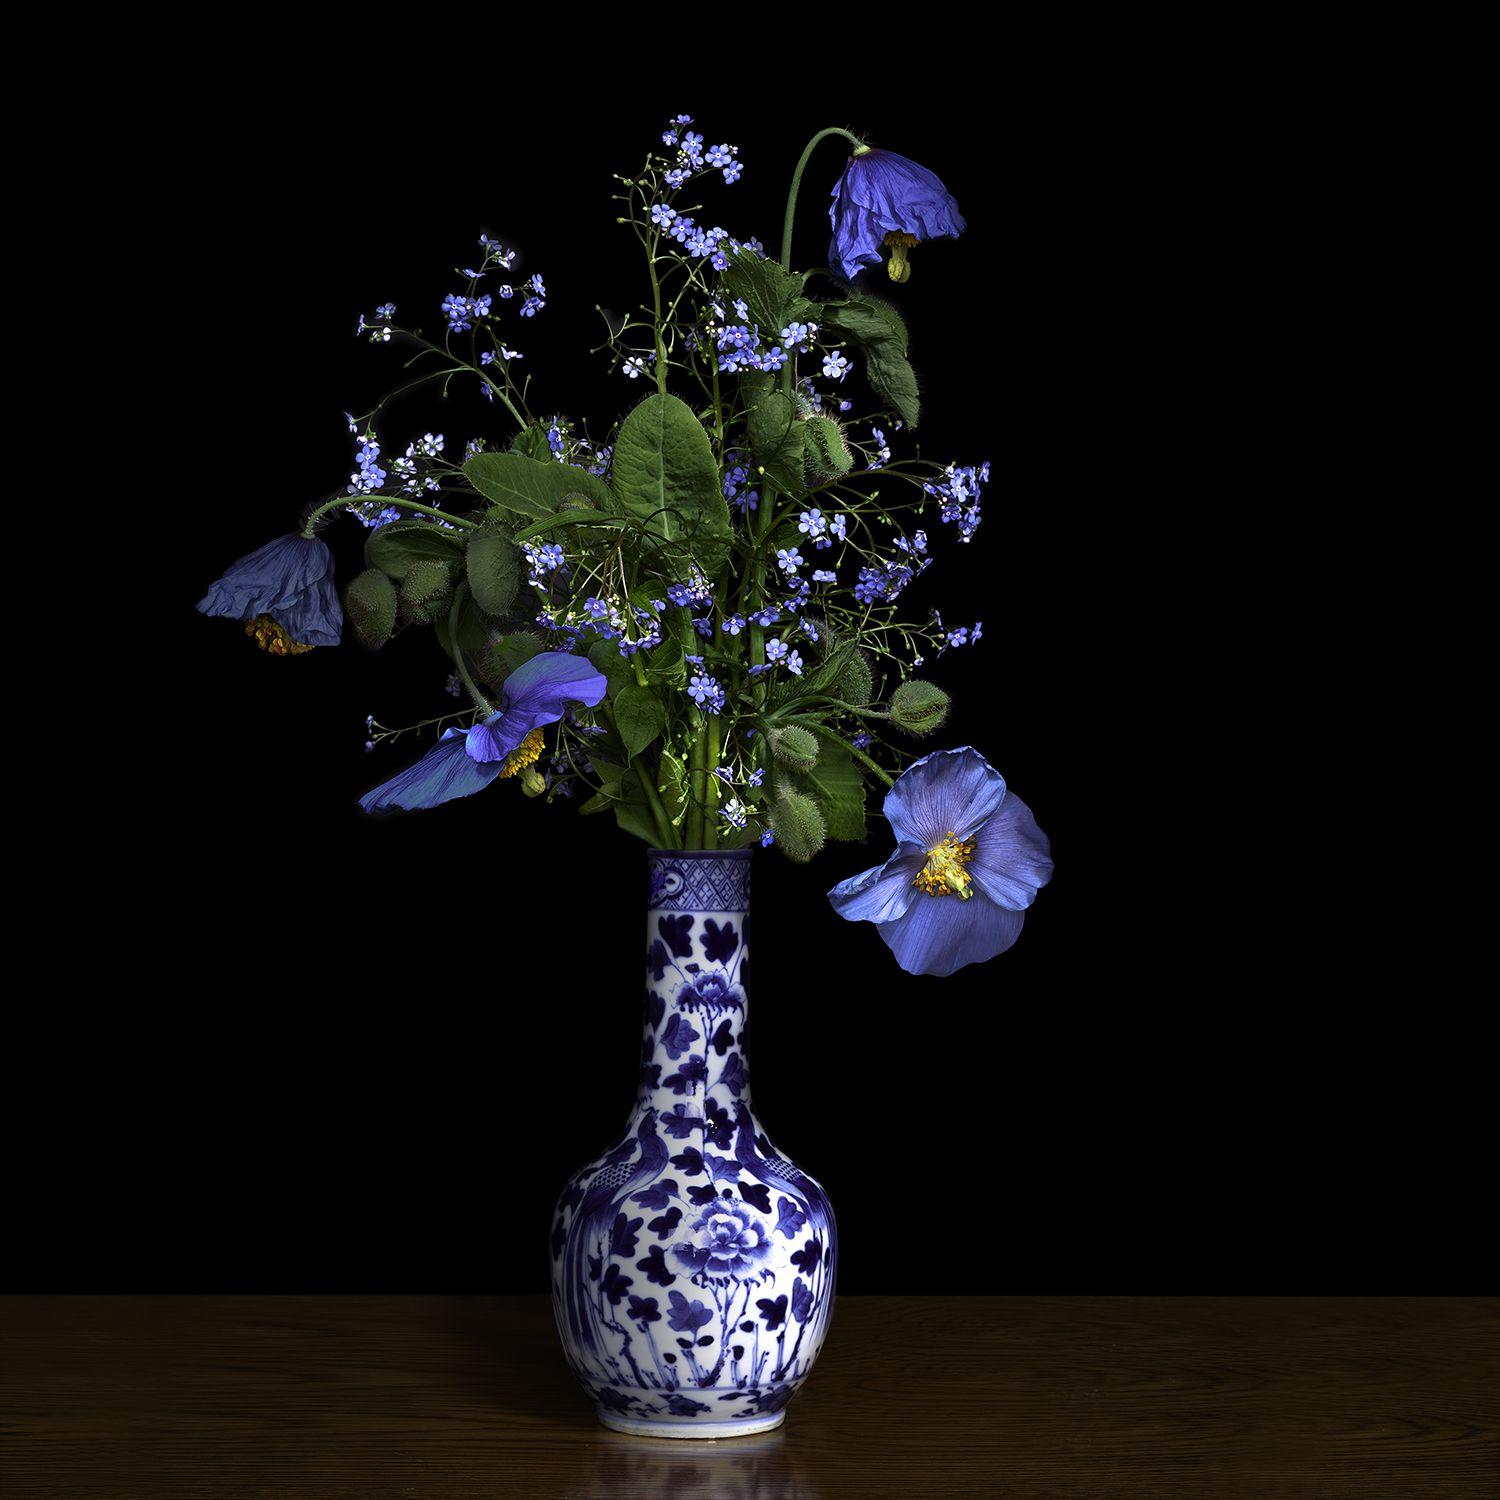 Blue Poppy in a Blue and White Chinese Vase - Photograph by T.M. Glass